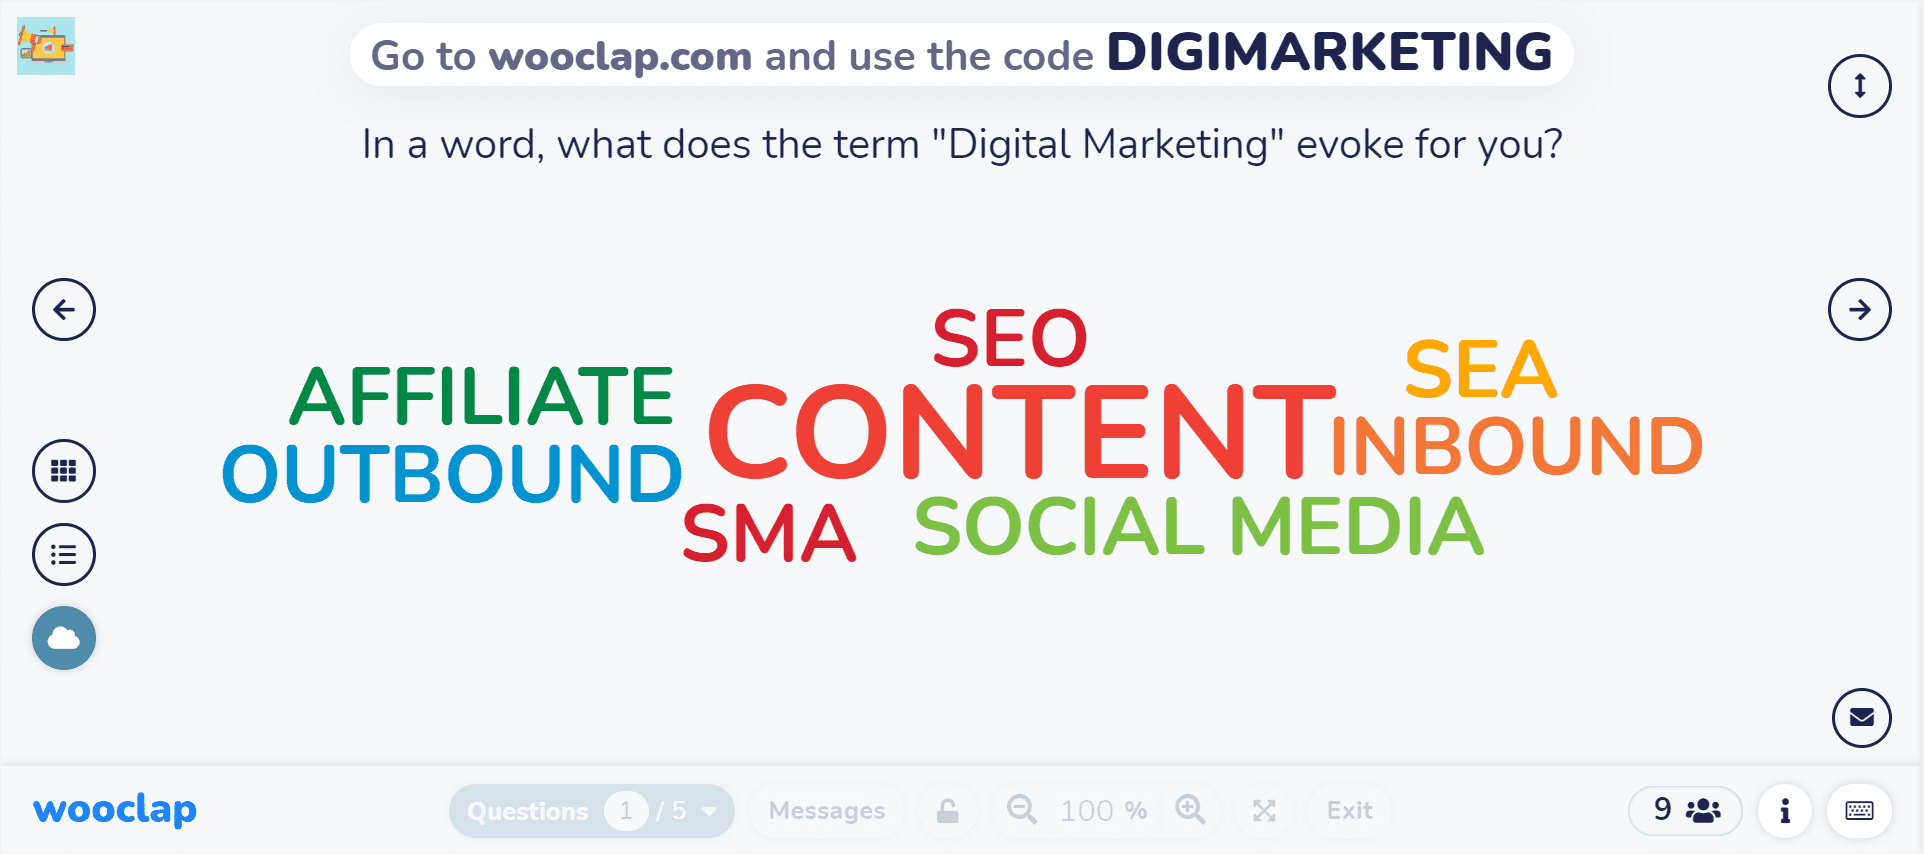 In a word, what does the term "Digital Marketing" evoke for you?
